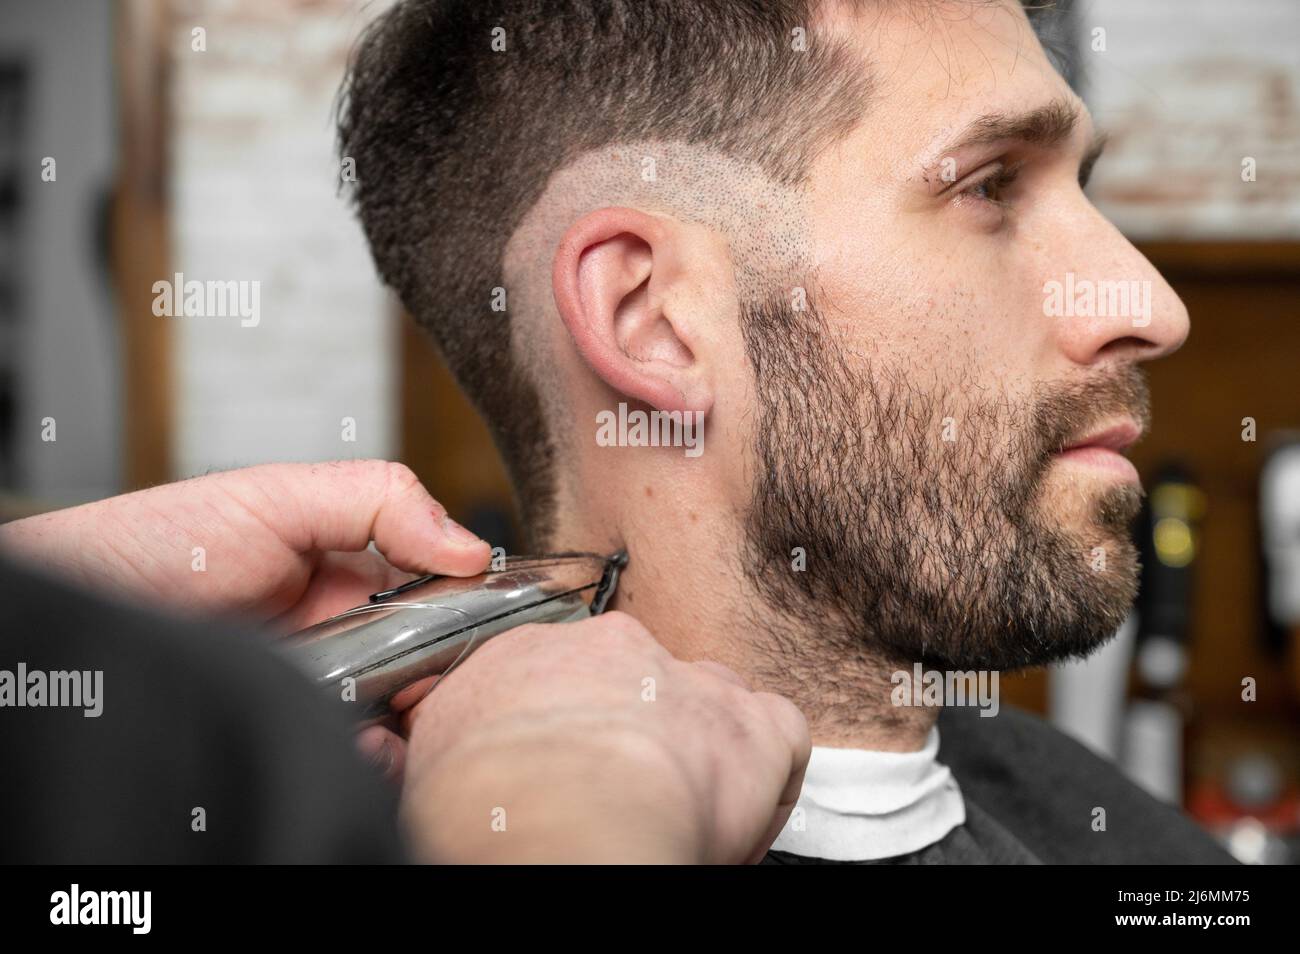 Man barber cutting hair of male client with clipper at barber shop. Hairstyling process. High quality photography. Stock Photo